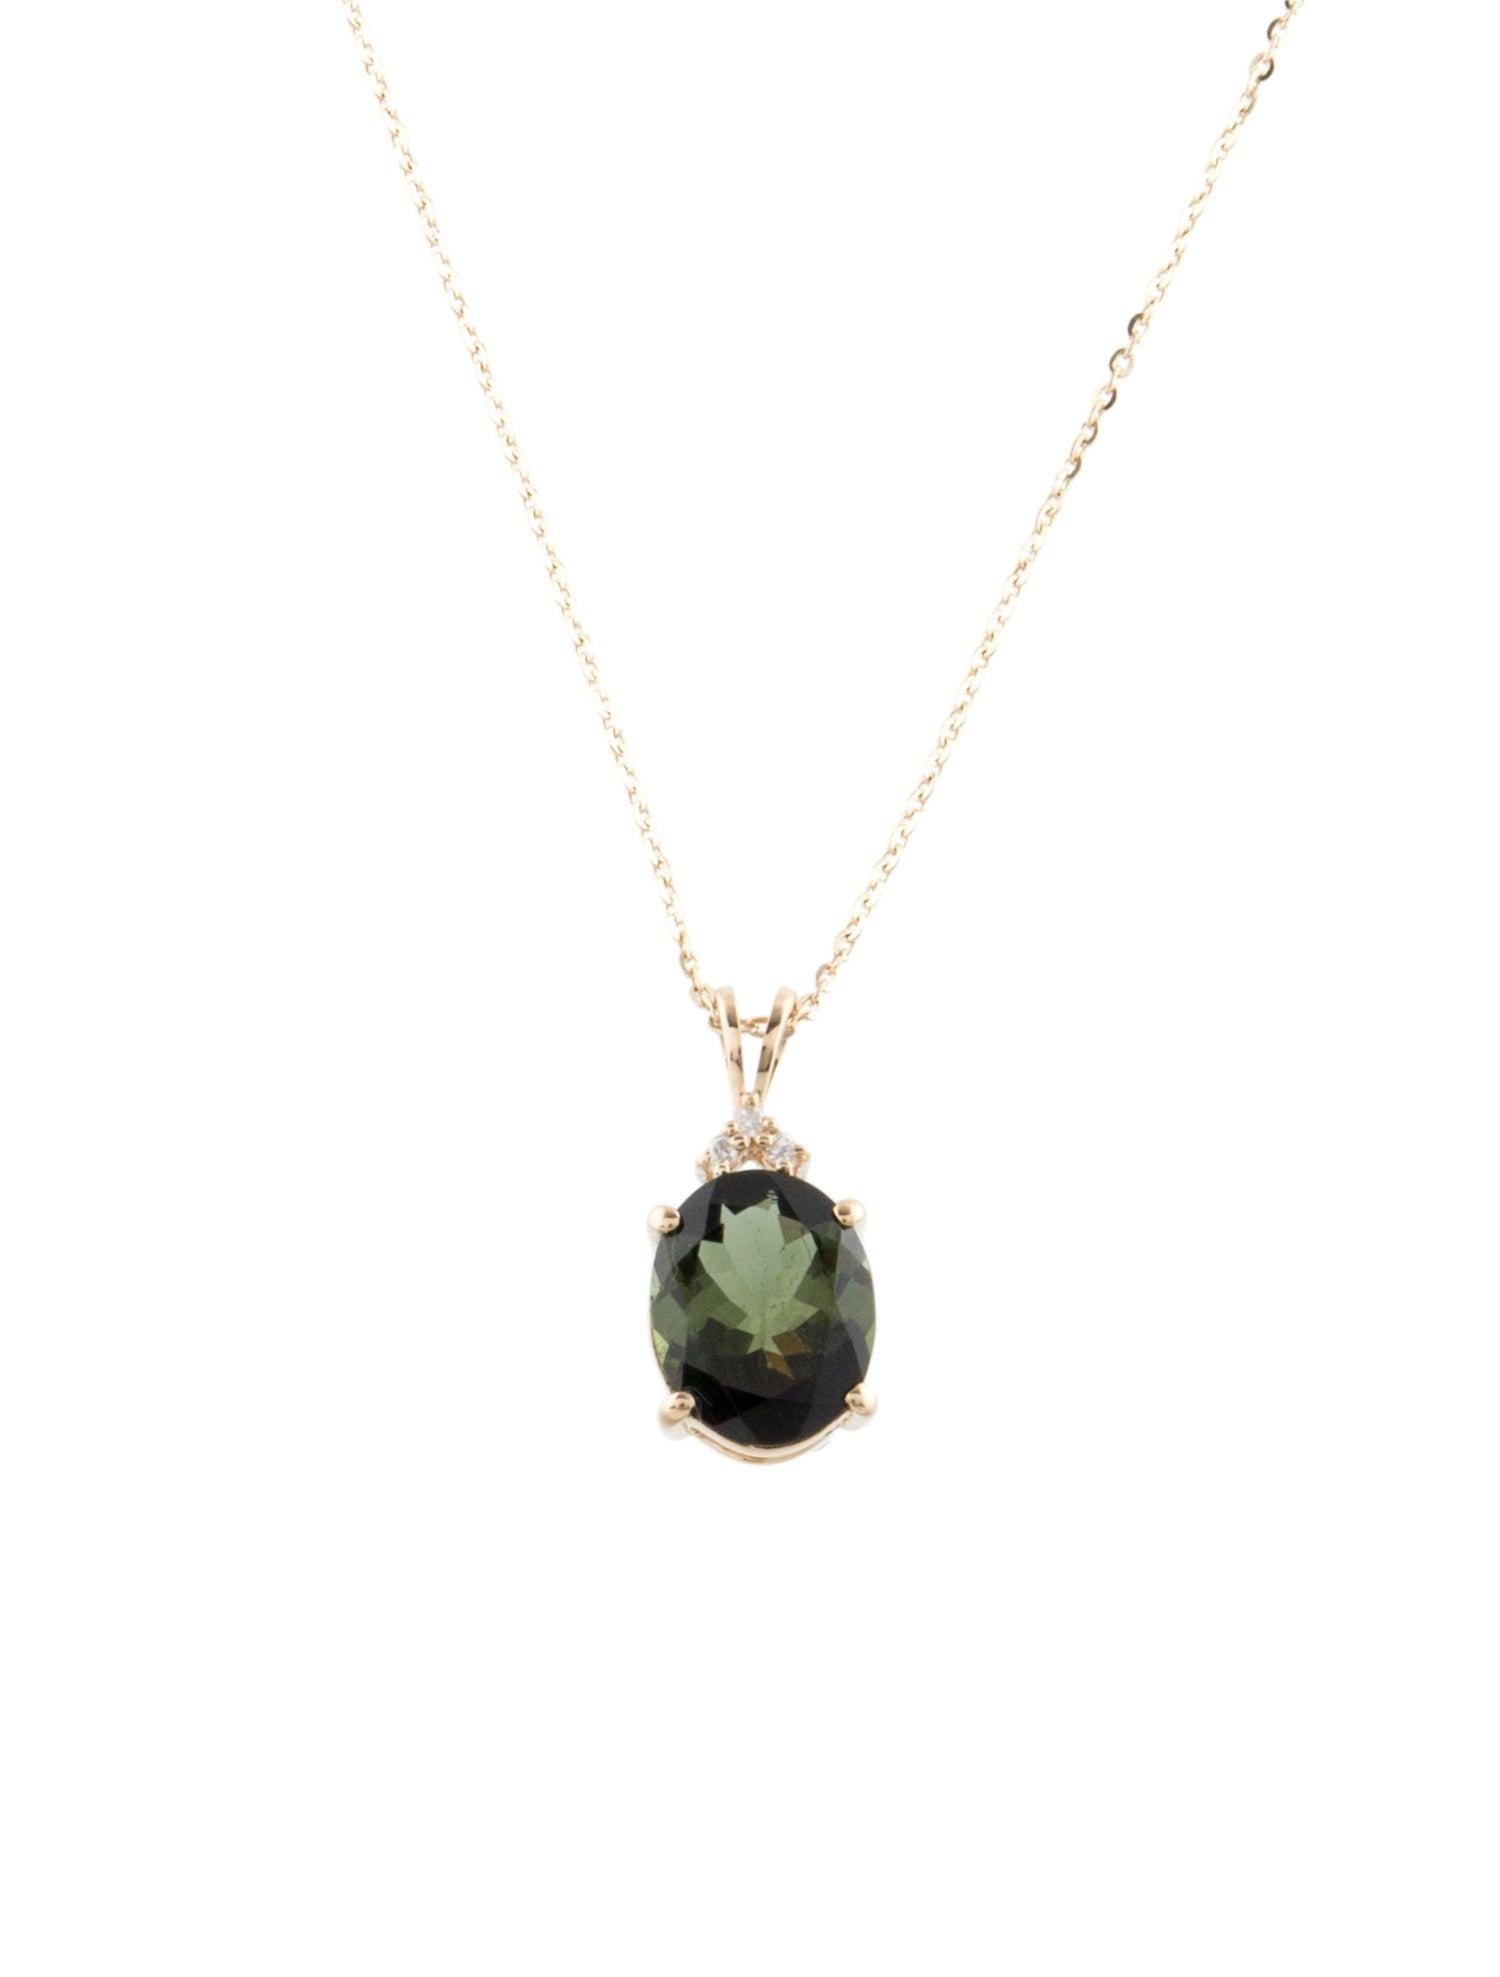 Step into the mesmerizing world of our Rainbow Gemstone Radiance collection with this exquisite Forest Green Tourmaline and Diamond Pendant. Crafted with precision and passion by Jeweltique, this pendant is a celebration of nature's kaleidoscope,